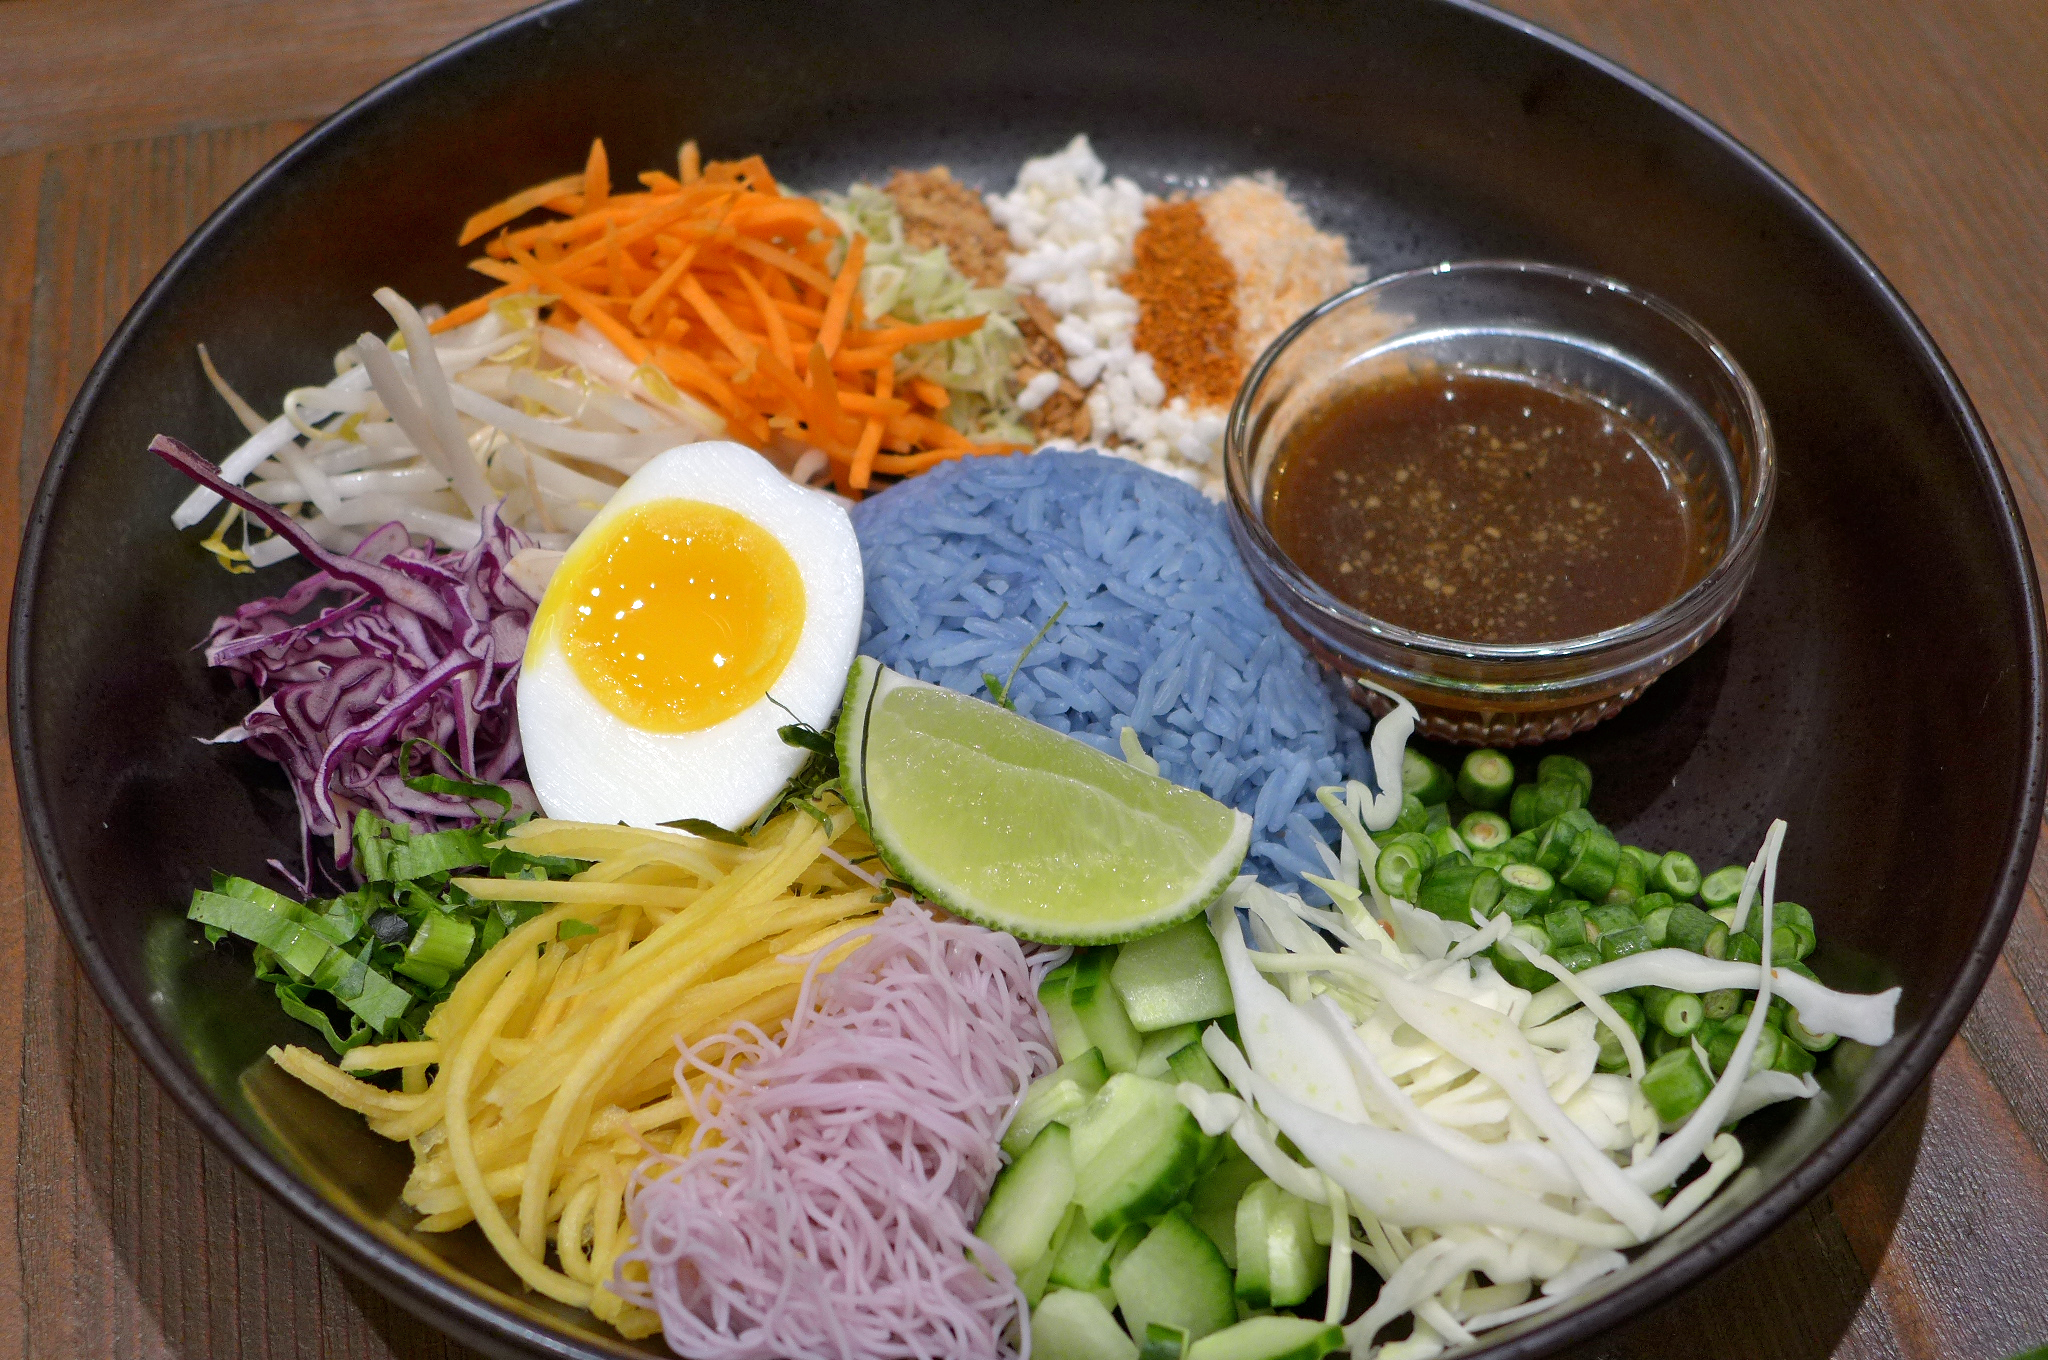 A bowl filled with all sorts of colorful ingredients.